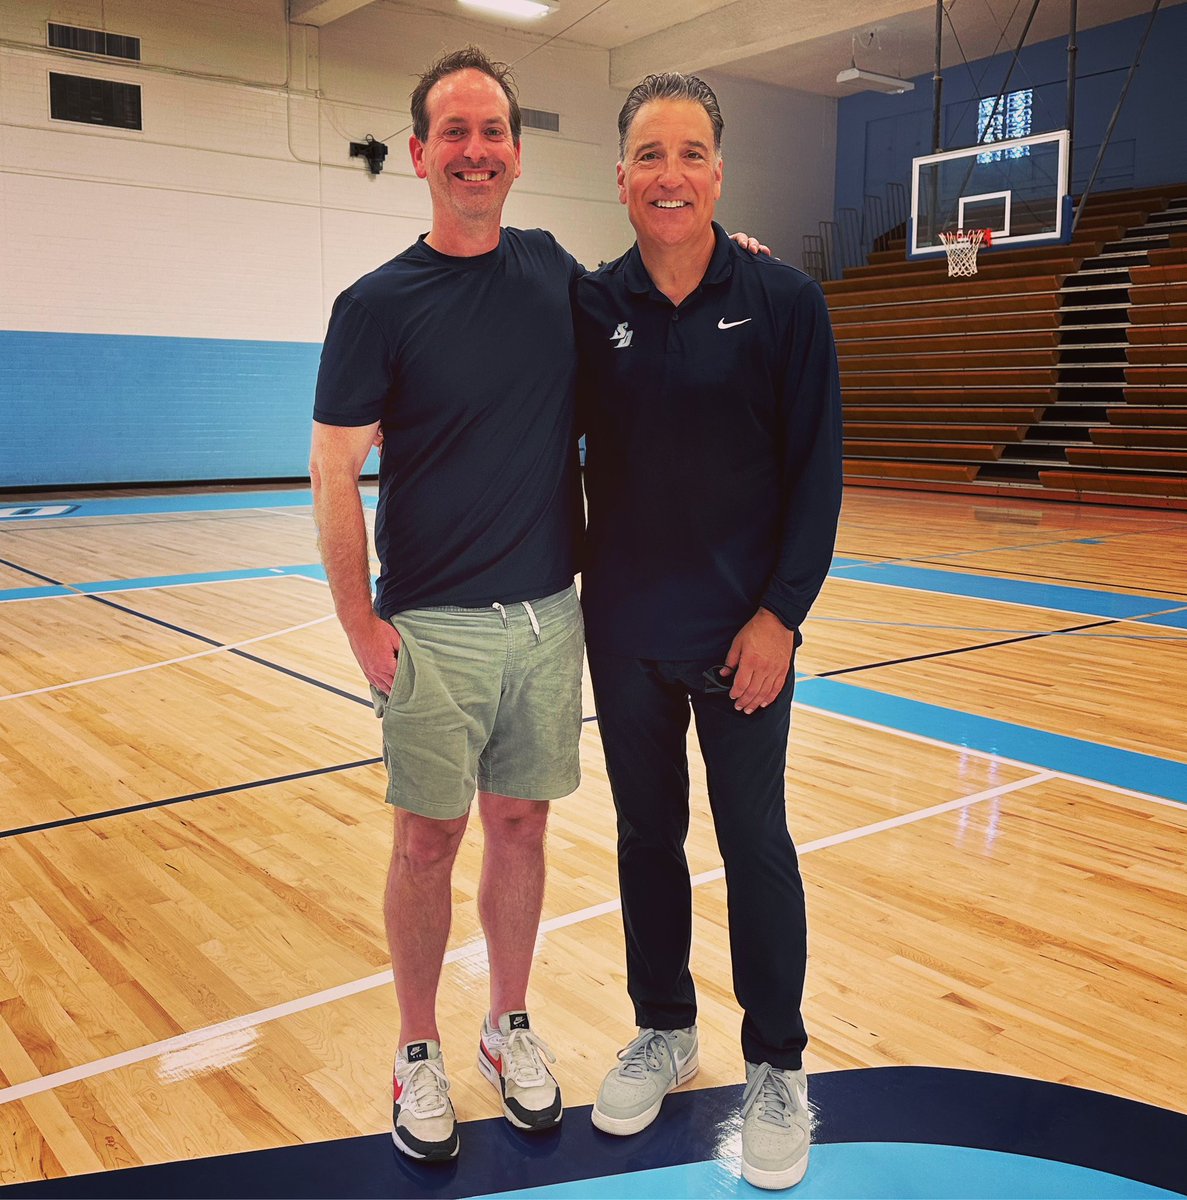 First coached David Levine in the 1980’s & it was terrific to catch up with him & his lovely wife Katie after our summer workout at USD yesterday. Grateful the game continues to serve as a bridge 2 lifelong friendships & lifelong learning. #Coaching #Friendship #Learning #Hoops♥️